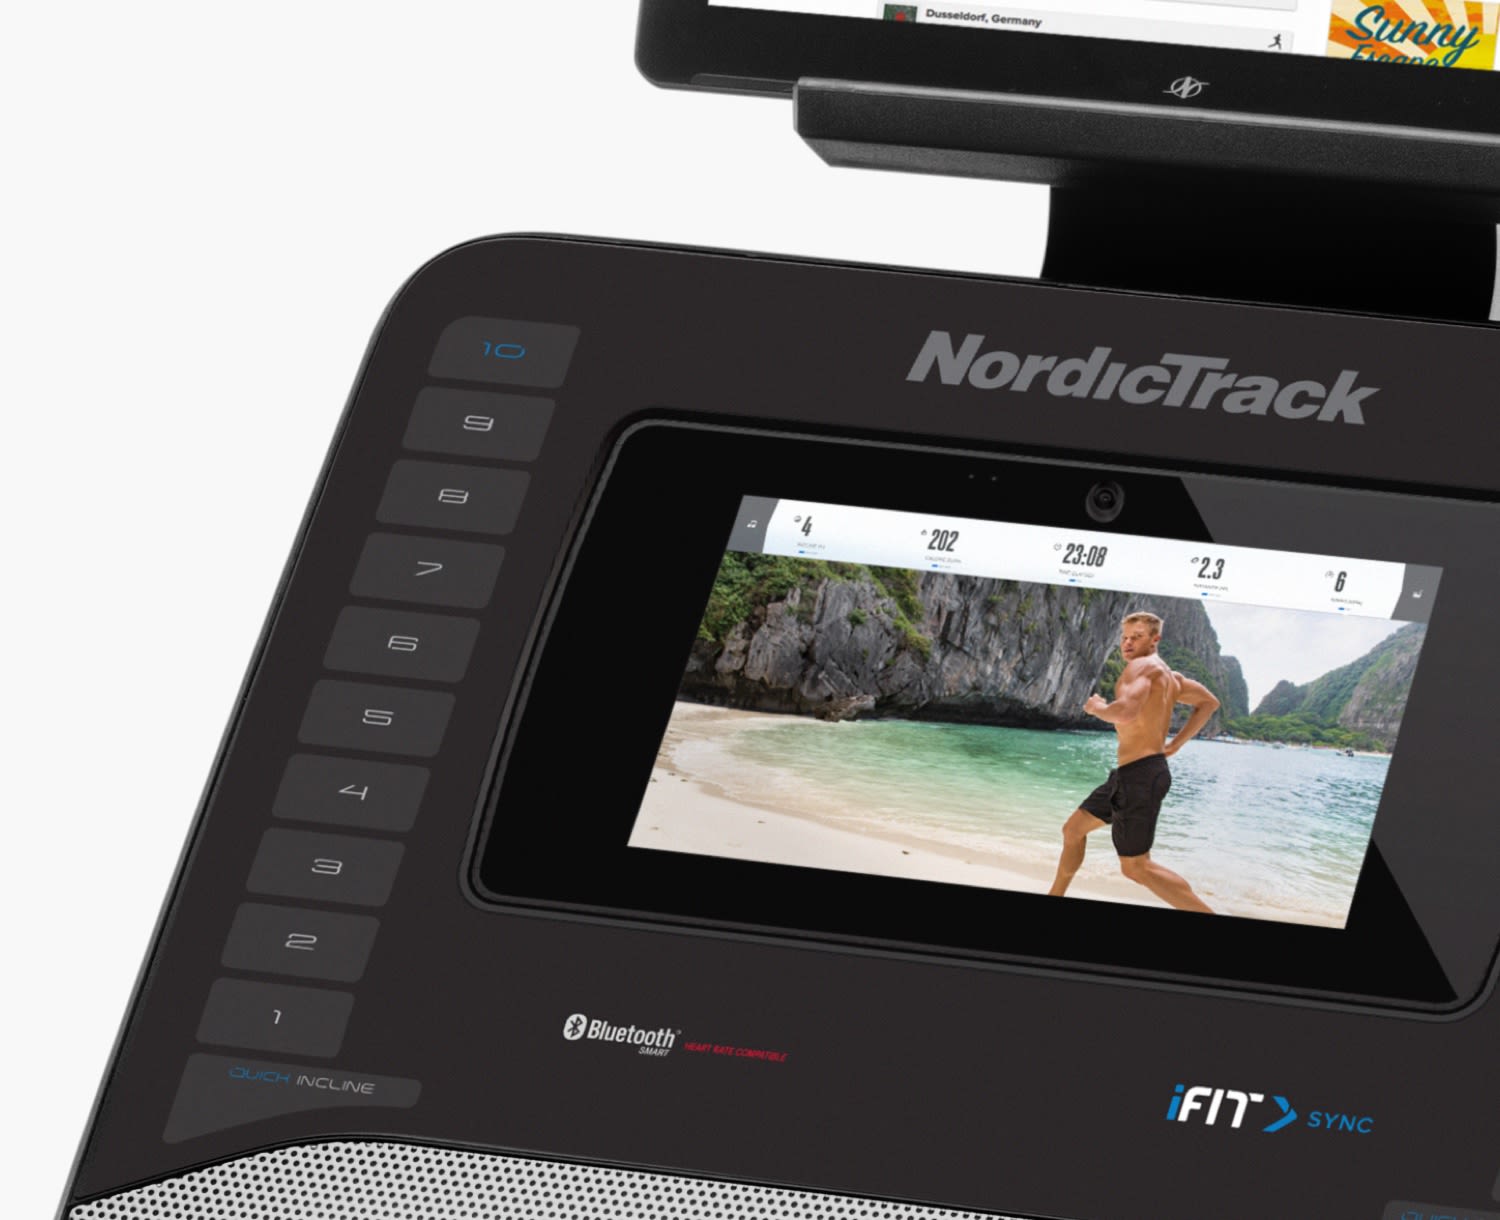 NordicTrack FreeStride Trainer FS7i Display With iFit and Google Maps